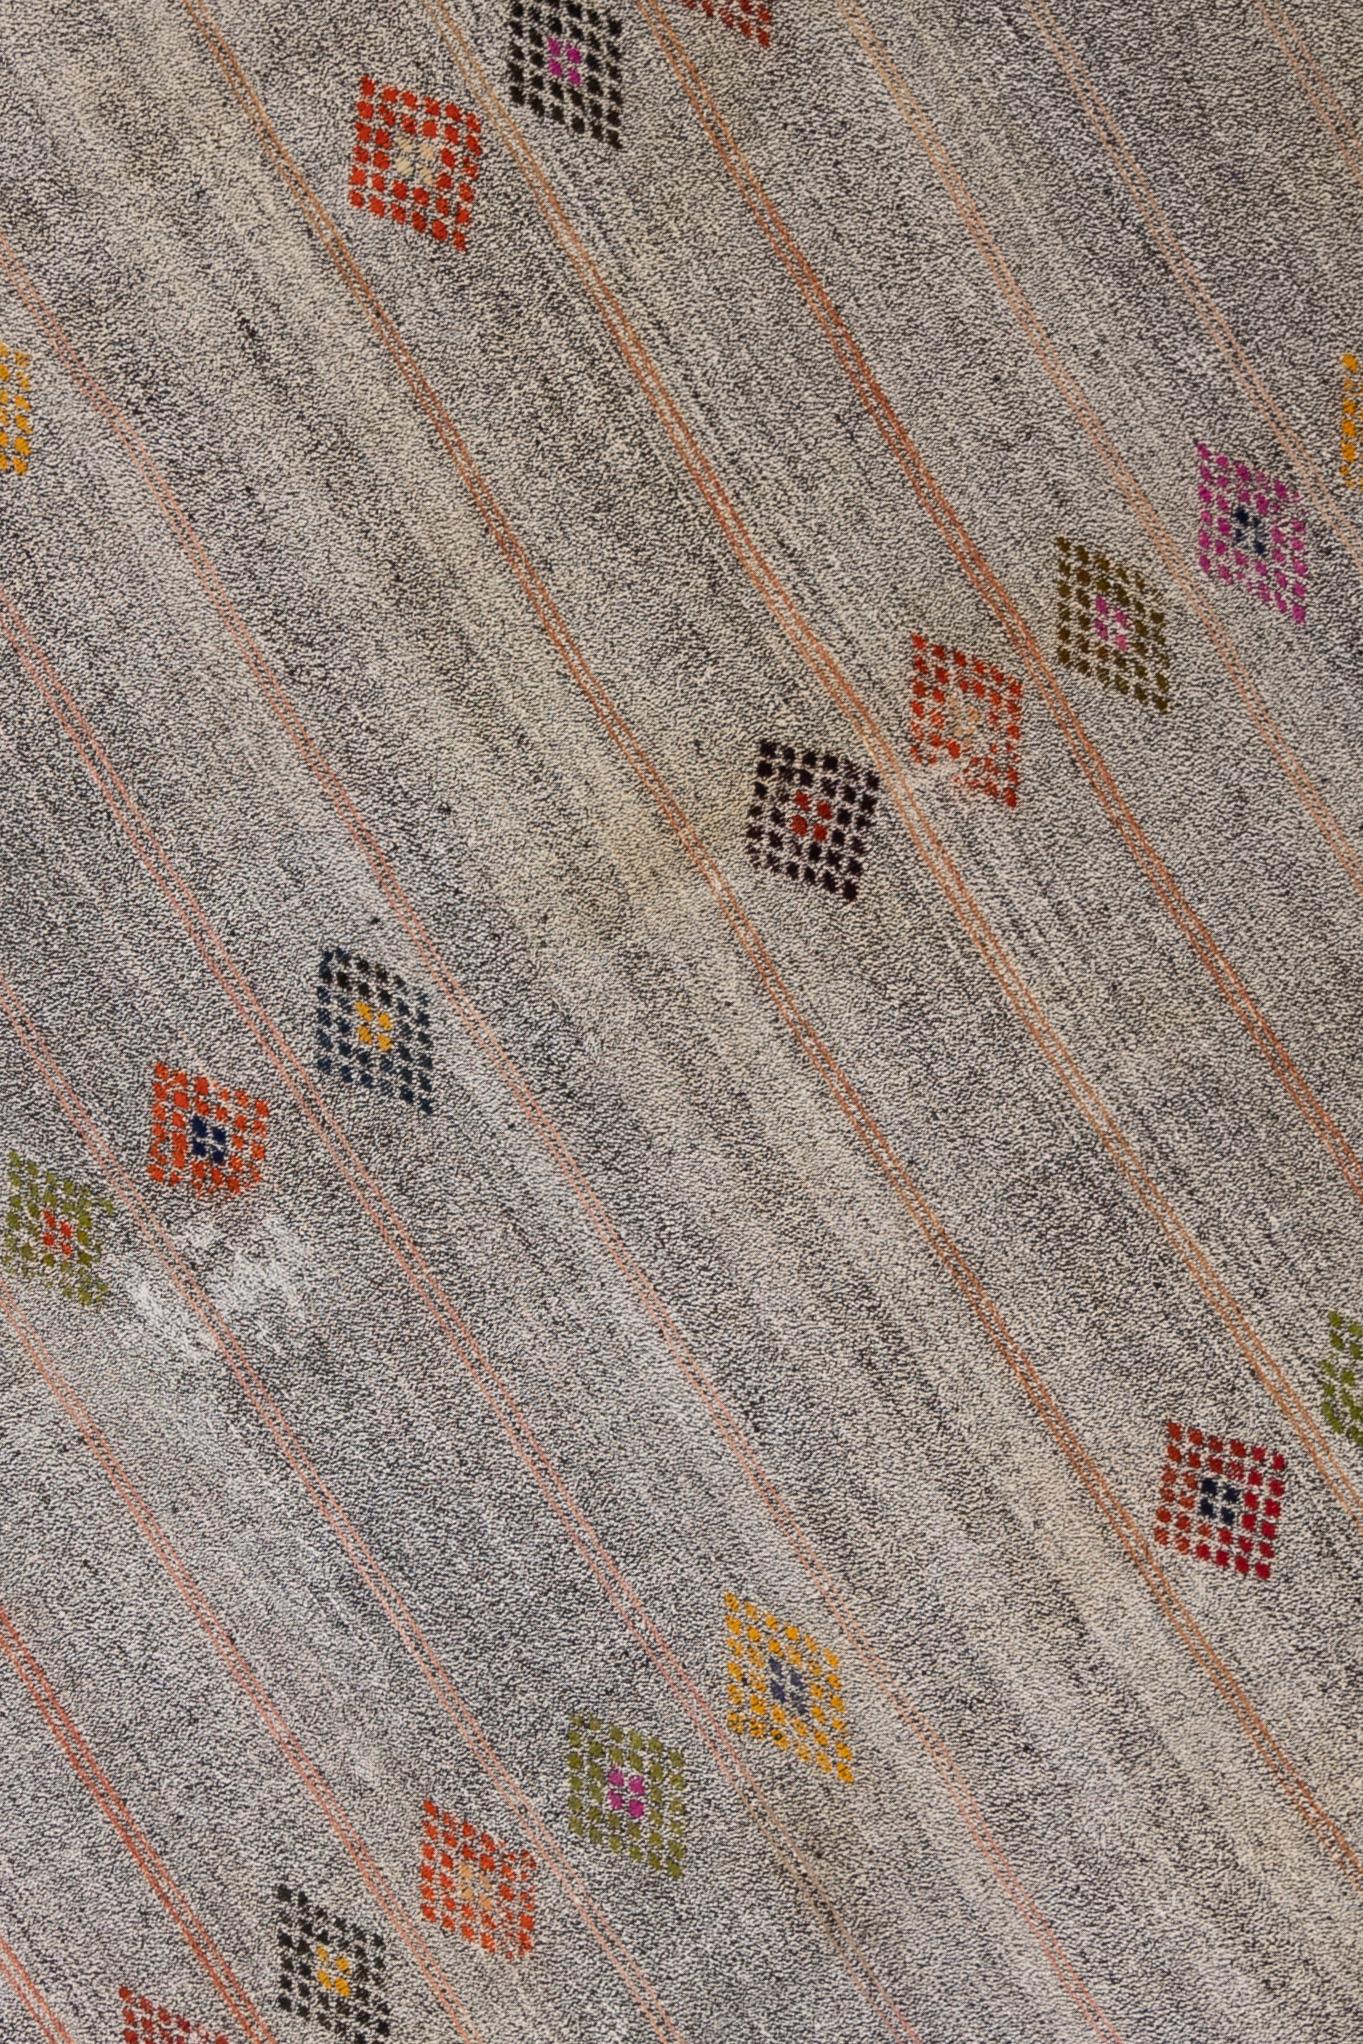 Age: Circa 1950

Colors: gray, magenta, yellow, brown, red

Pile: flatweave

Wear Notes: 0

Material: goat hair. 

Midcentury Anatolian chaput flatweave rug with fun pops of color. Great for layering.

Wear Guide:
Vintage and antique